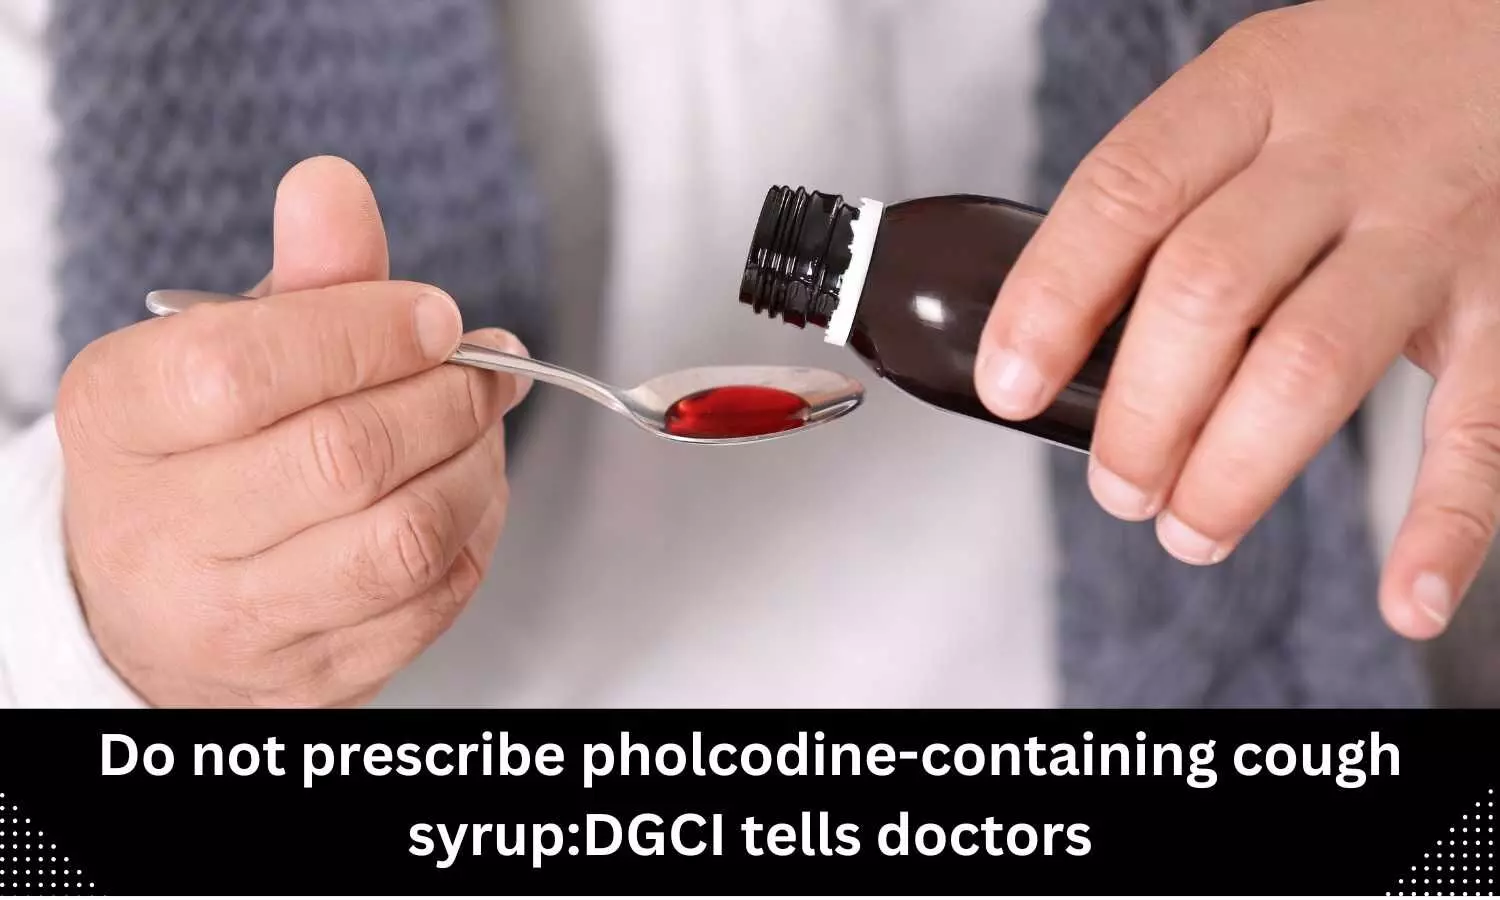 DCGI tells doctors not to prescribe pholcodine-containing cough syrup